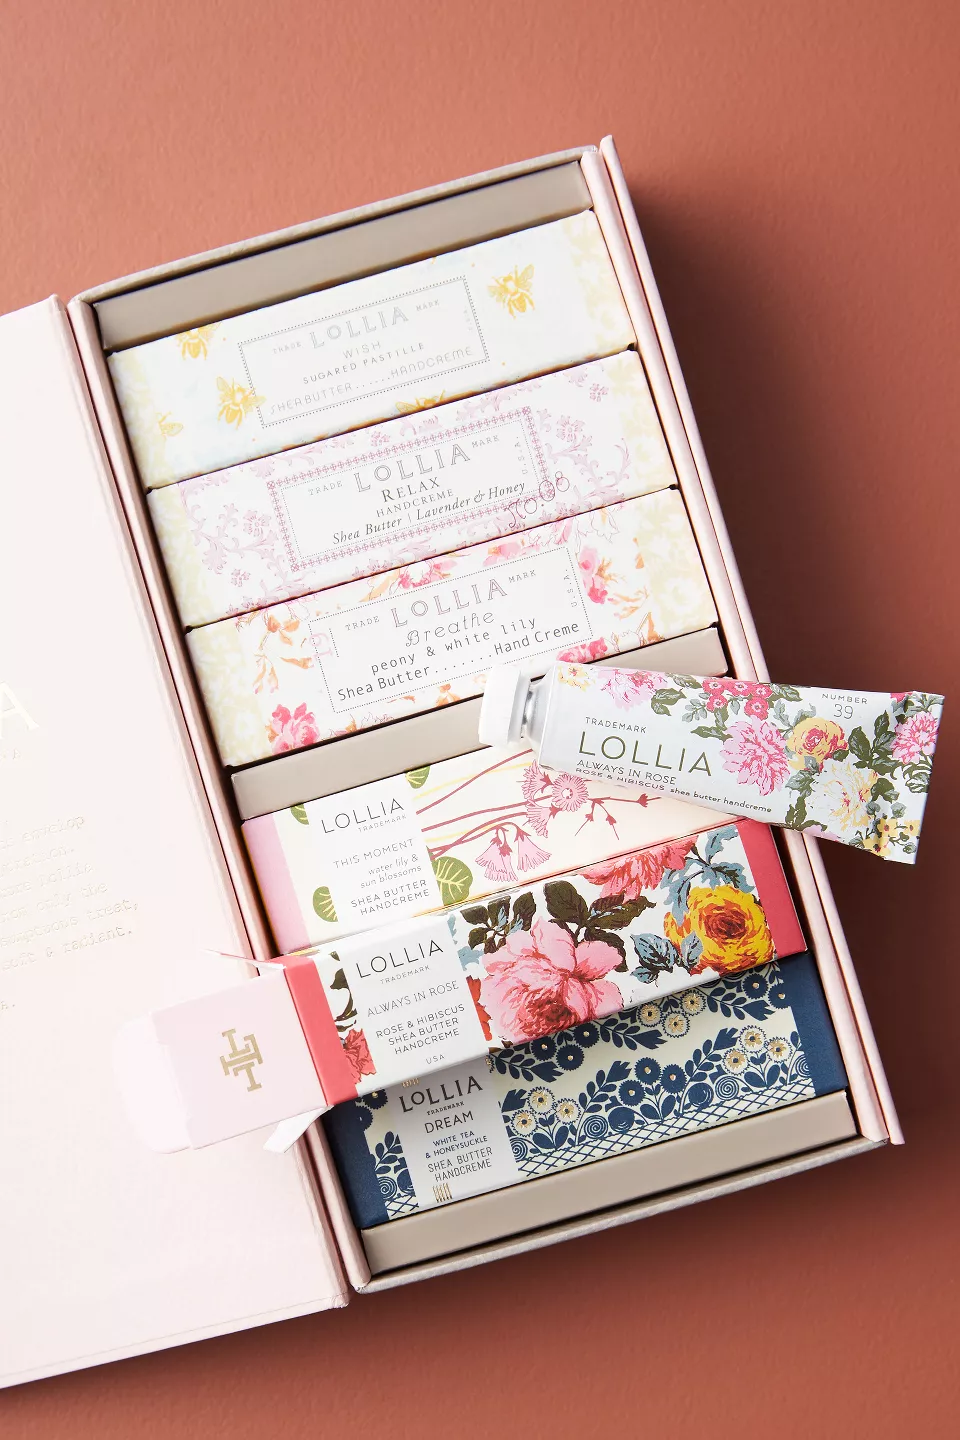 Wanna something practical but still thoughtful? This hand cream gift set is sure to be the best idea for your beloved grandma on this Mother’s Day or any special occasion. A set of 6 different scents with a gorgeous design helps to retain moisture and add a light fragrance for your grandma’s hands even in the coldest winter.